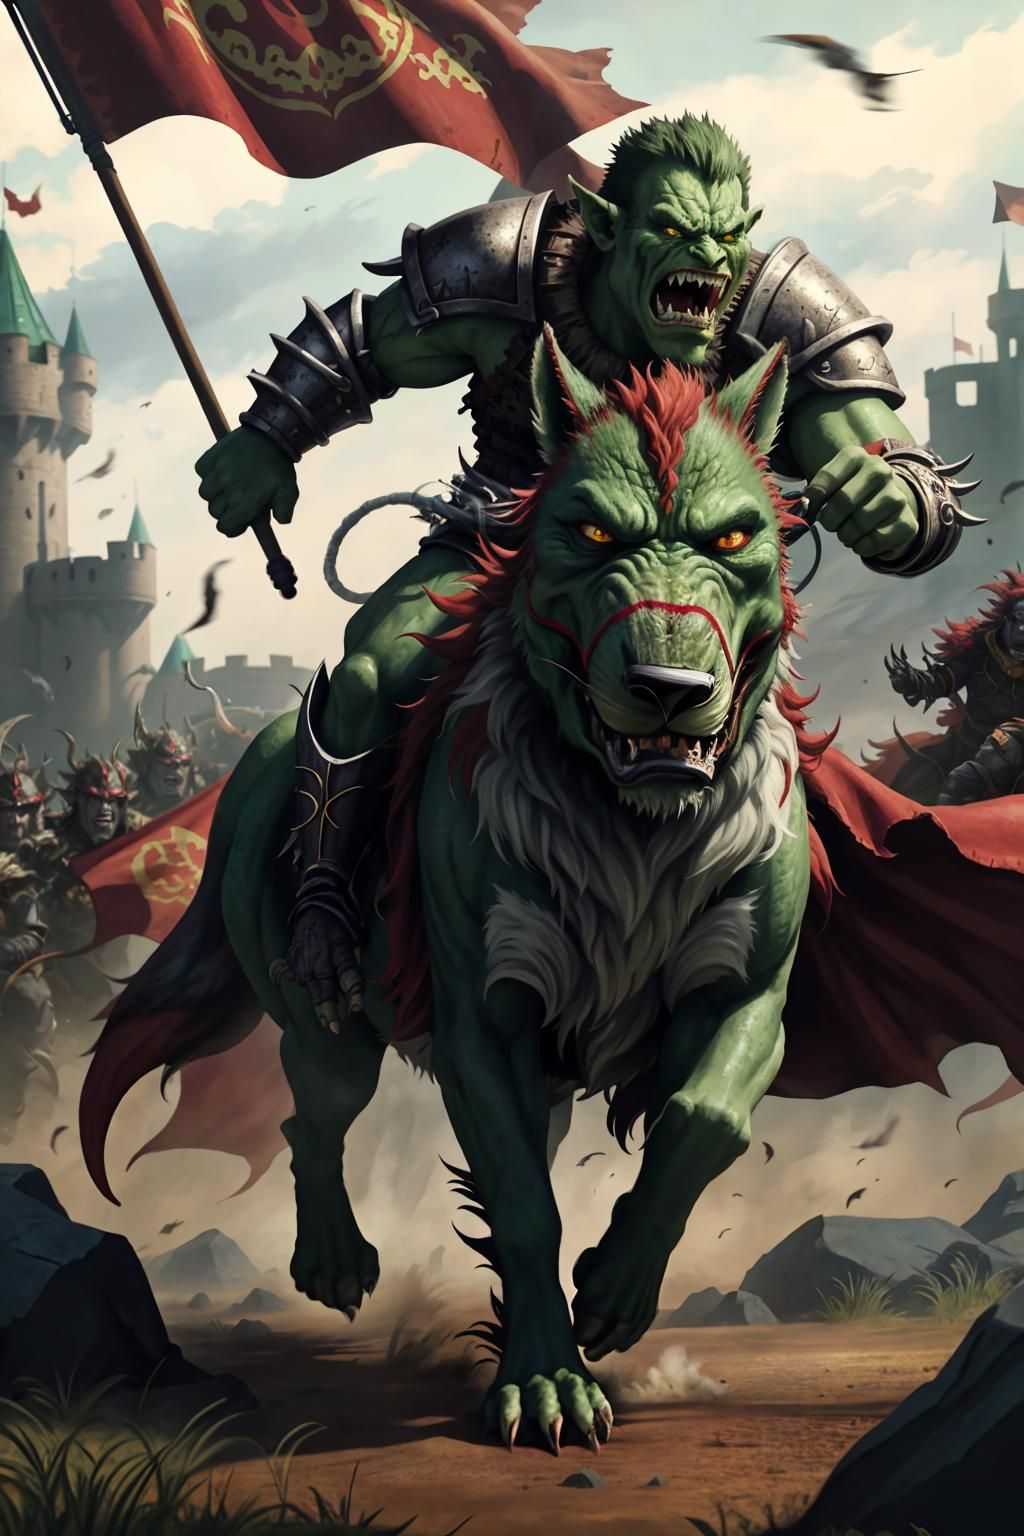 green orc riding a green wolf in battle